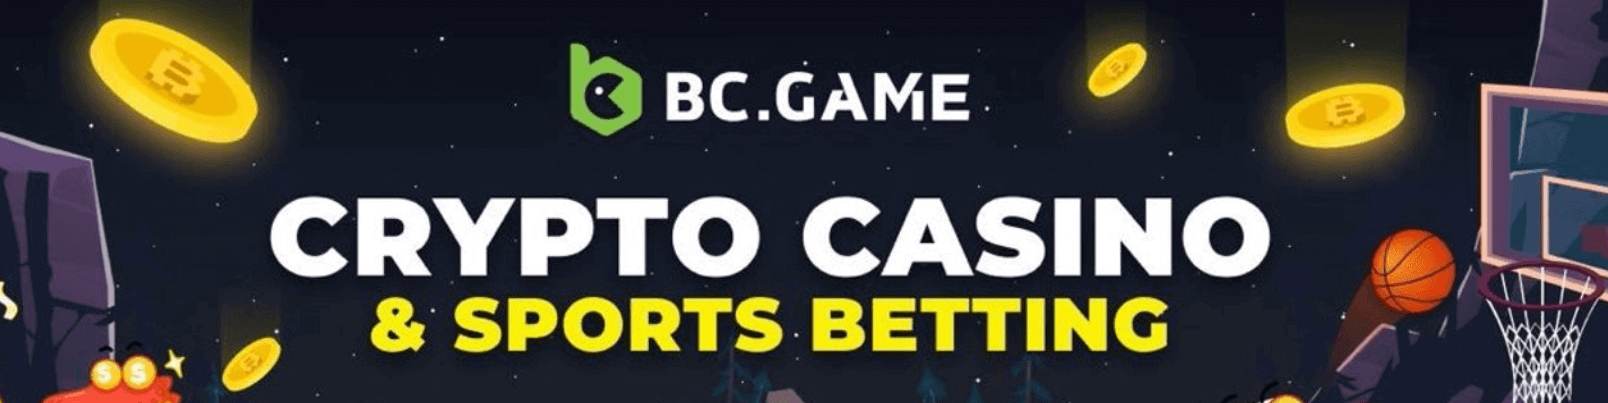 No More Mistakes With BC Game Log in to your account